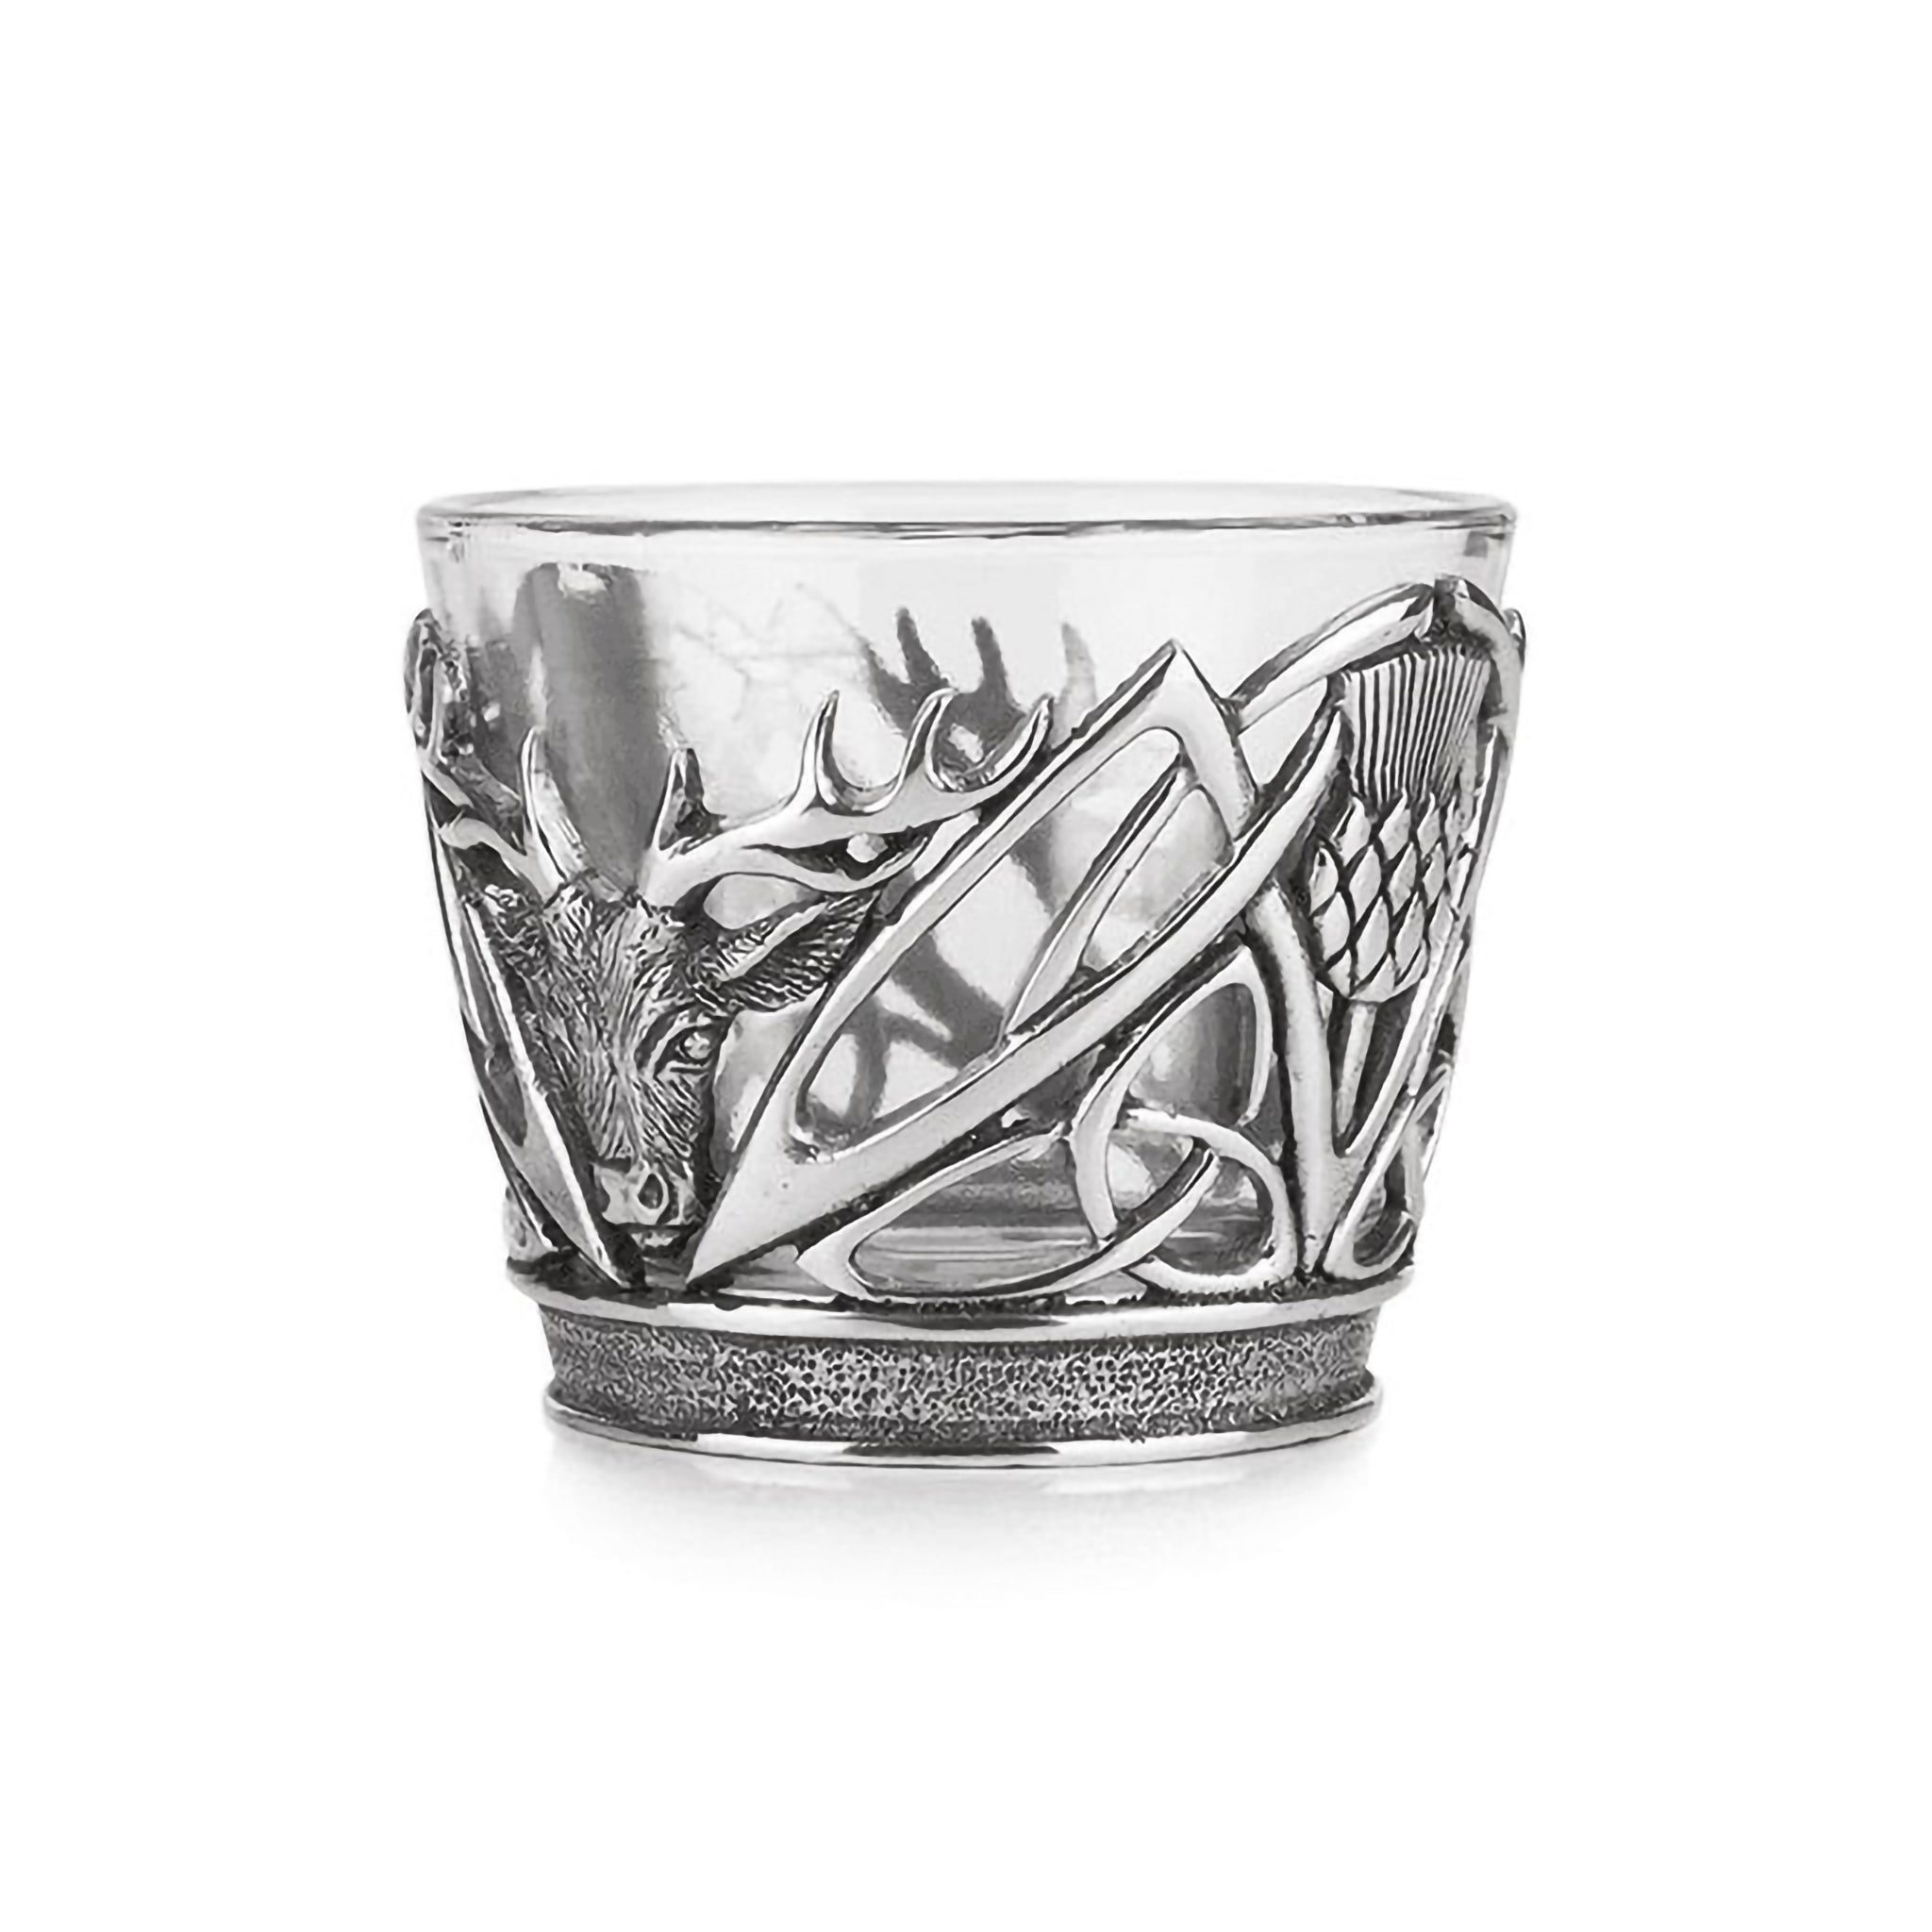 Glass tealight holder with pewter base featuring stag heads with thistles and trinity knots